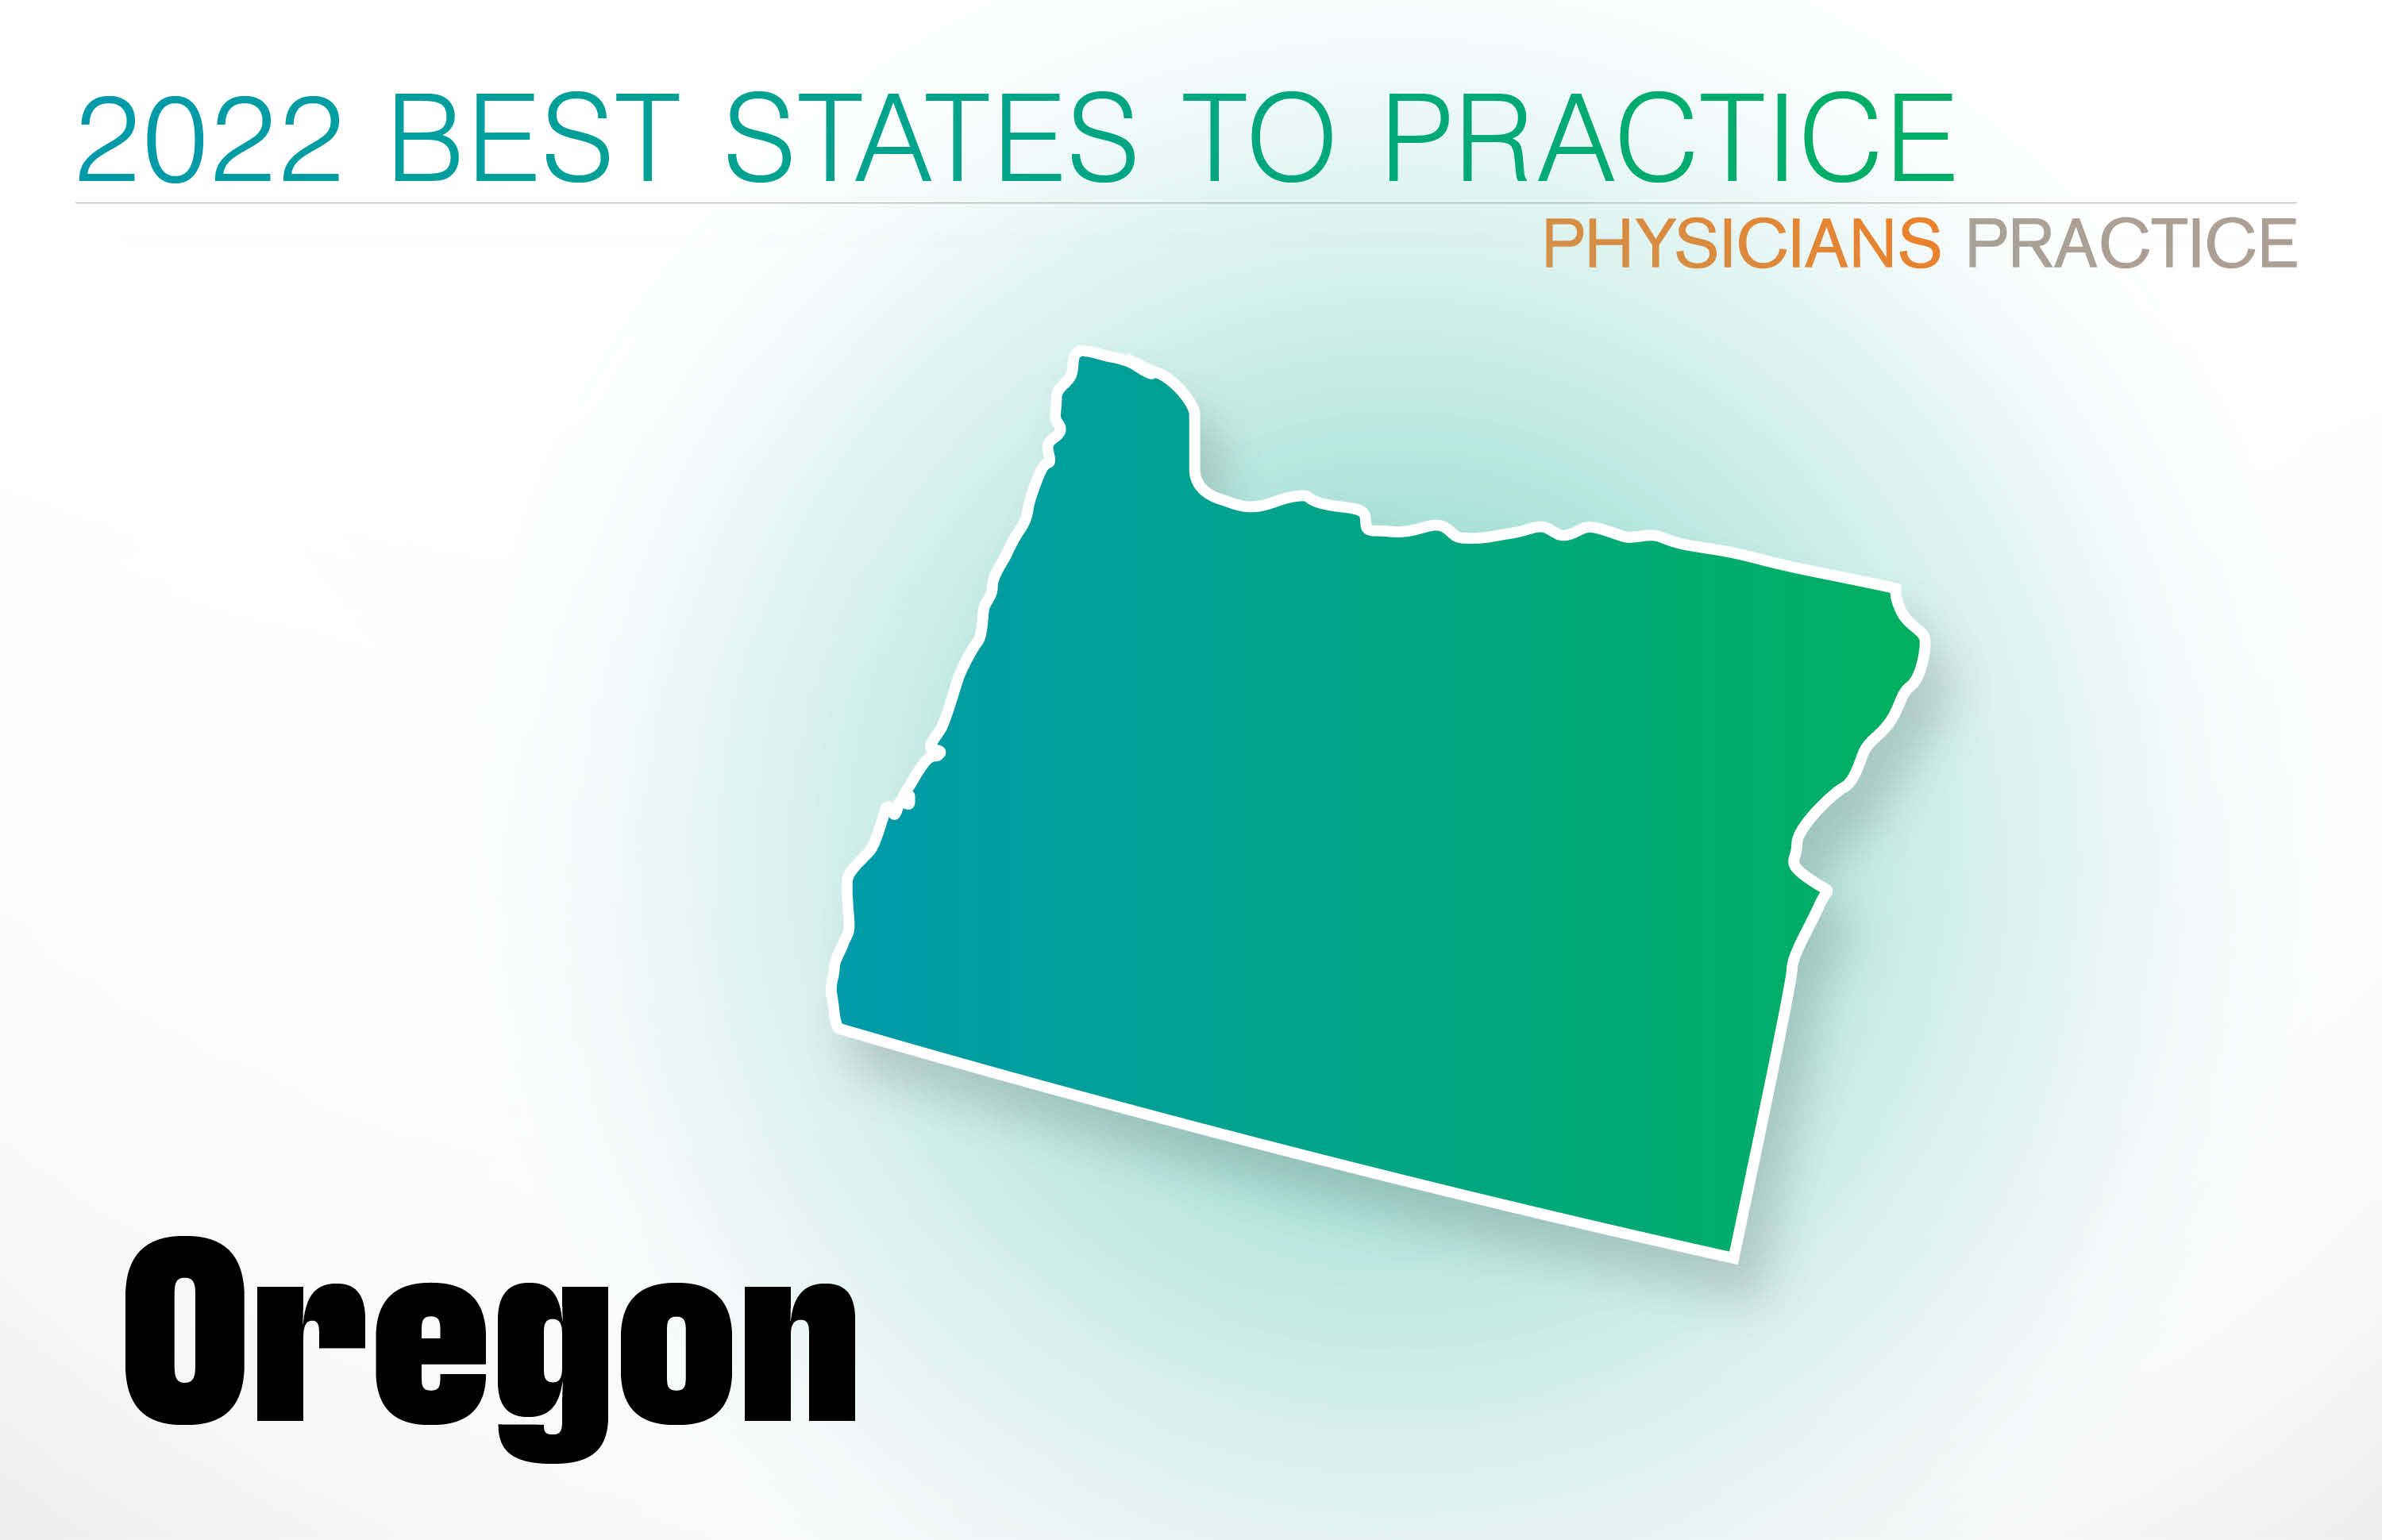 #31 Oregon Rankings: Cost of living: 44 Physician density: 38 Amount of state business taxes collected: 22 Average malpractice insurance rates: 15 Quality of life: 38 GPCI: 13